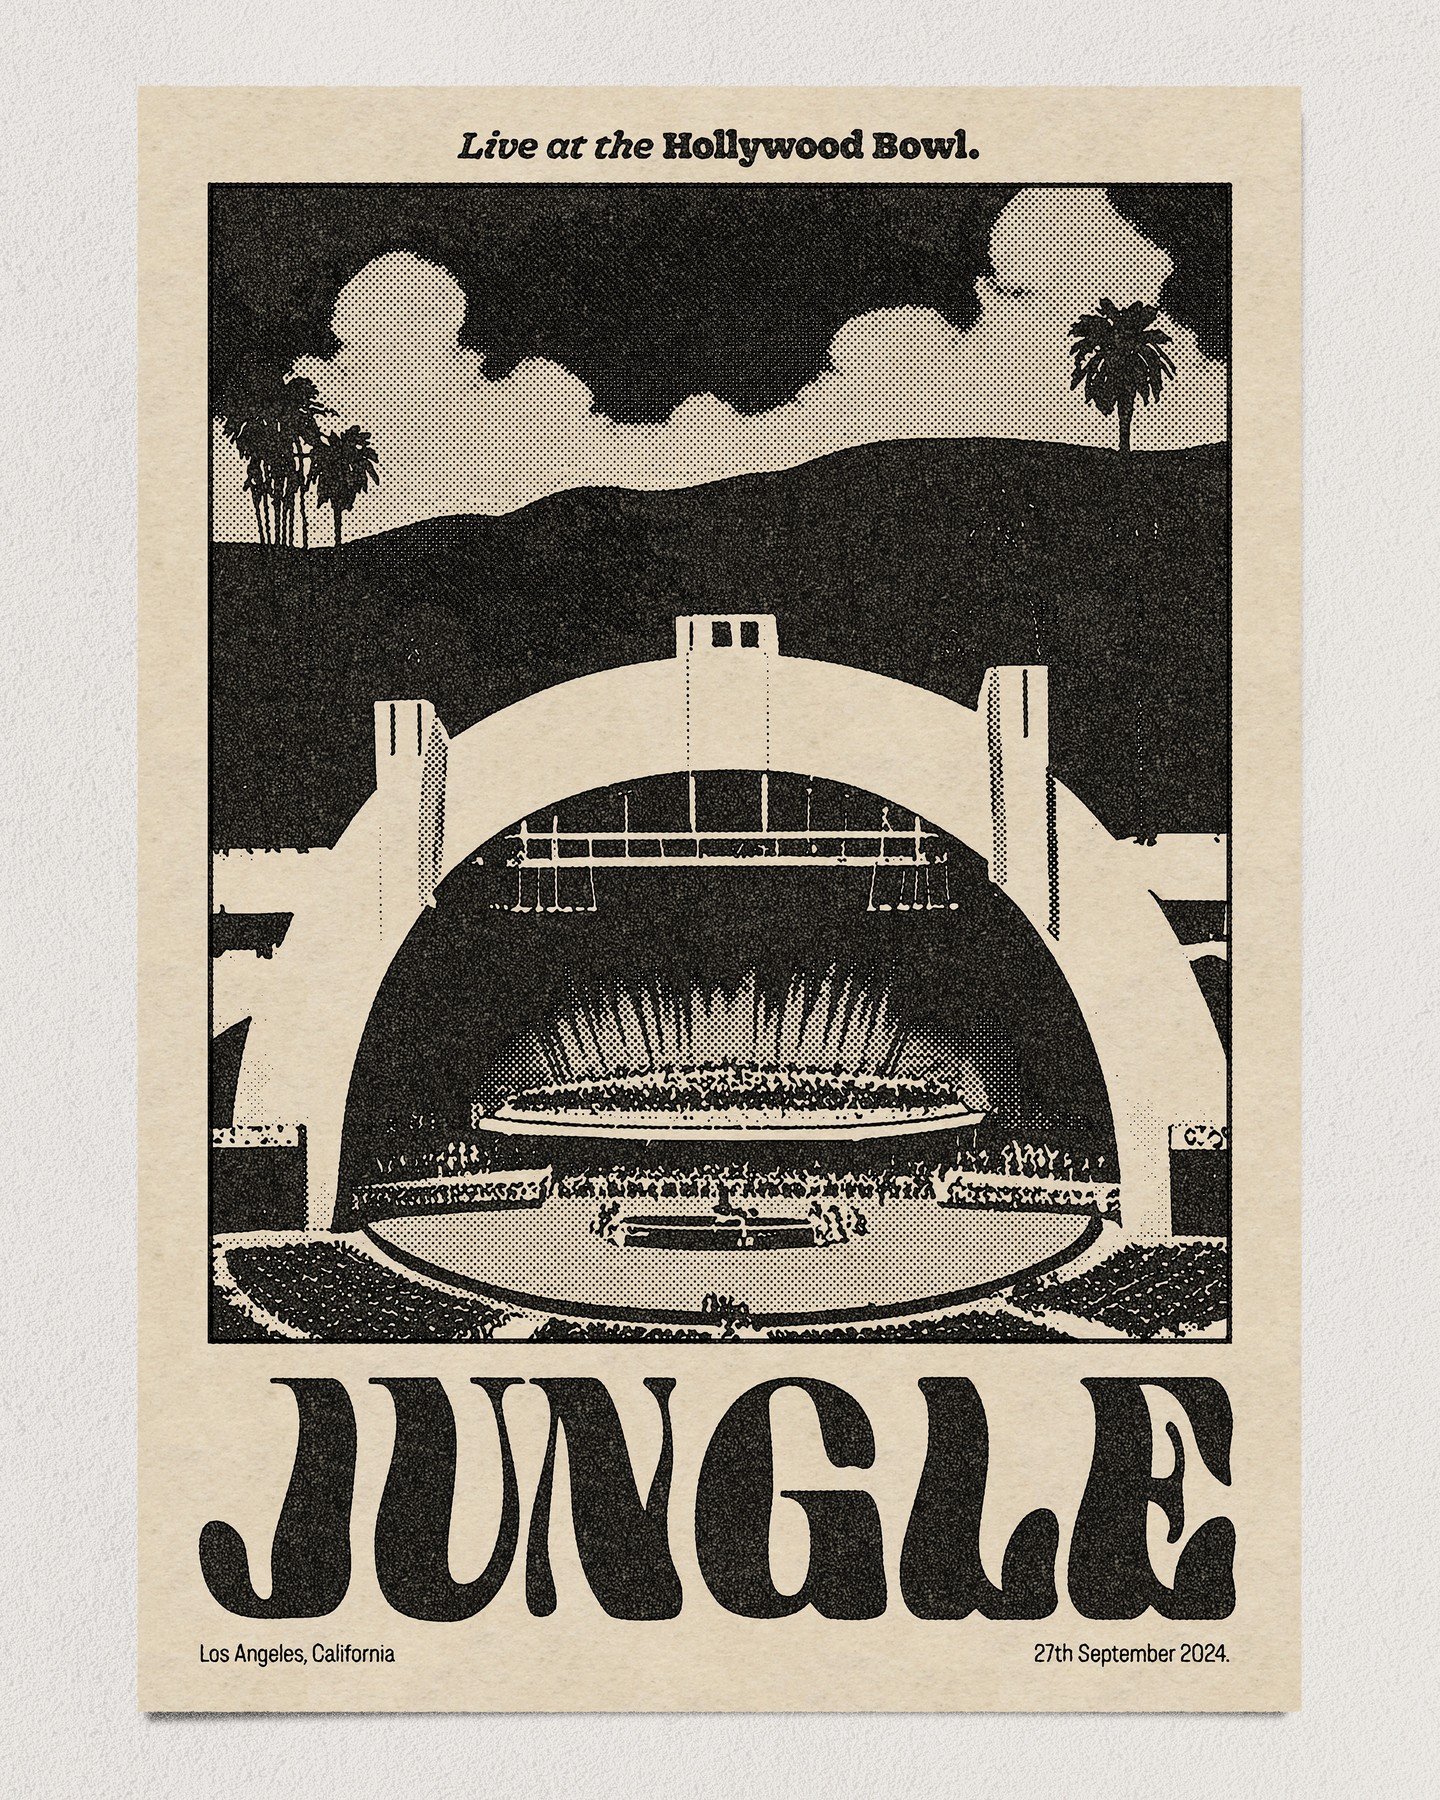 Jungle will be making their debut at the prestigious @hollywoodbowl on Sept 27 🎉

Pre-sale tickets go on sale today 30 Apr at 10am PT / 1pm ET.

@hollywoodbowl 
@jungle4eva